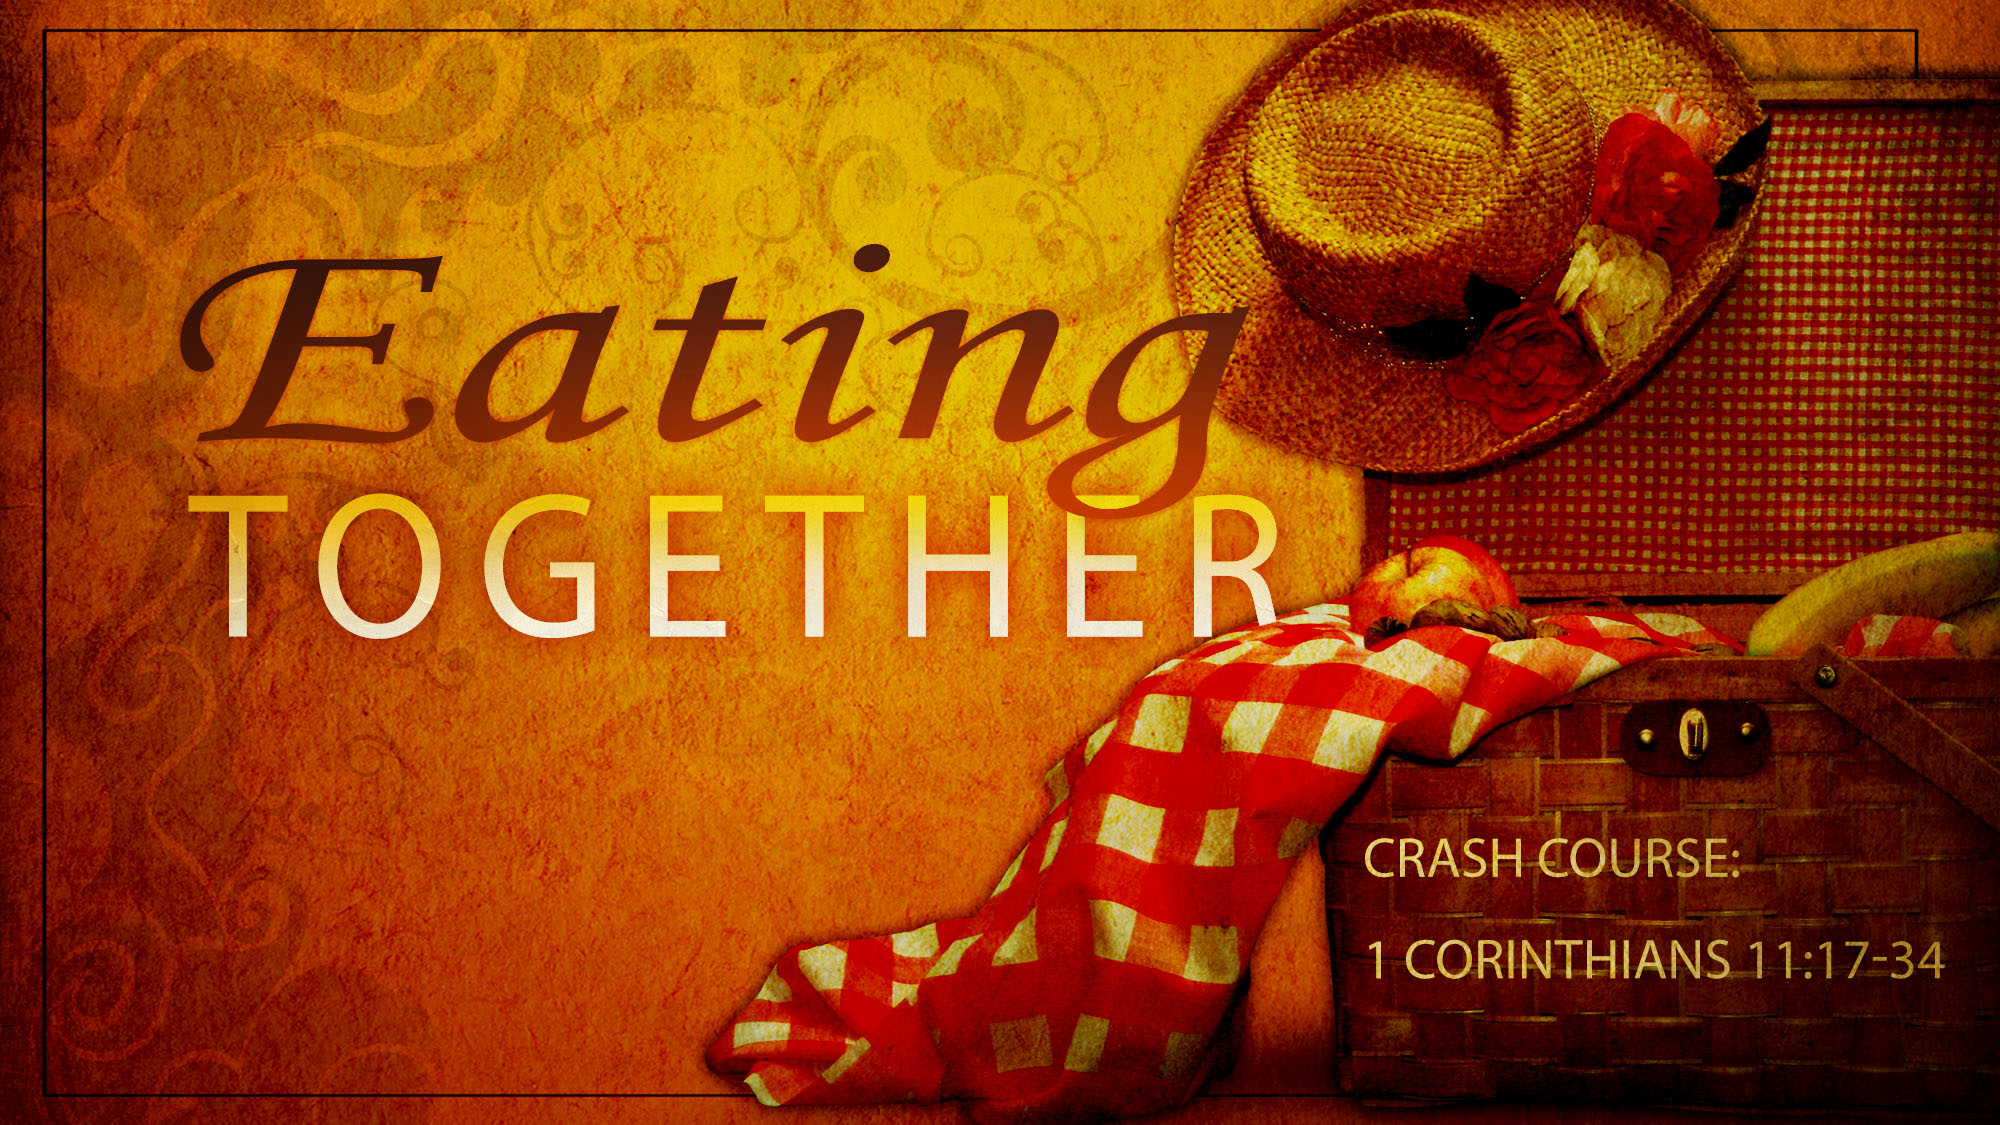 Eating Together: Crash Course in 1 Corinthians 11:17-34 Image